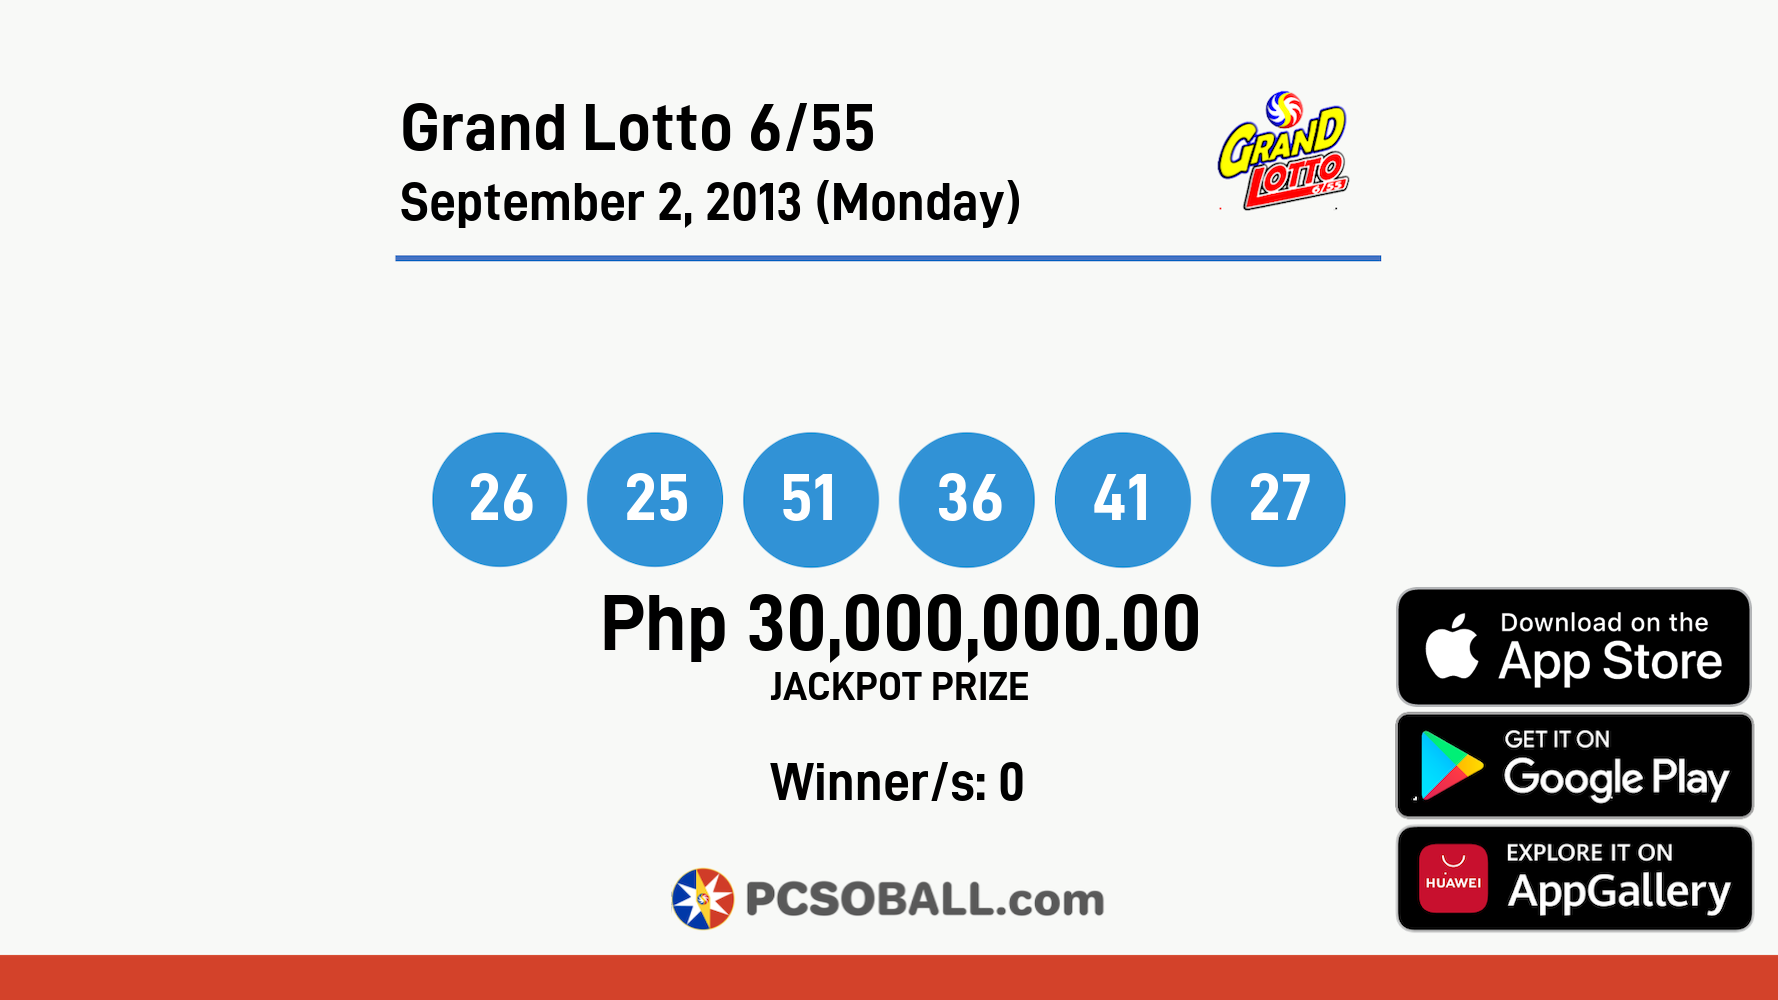 Grand Lotto 6/55 September 2, 2013 (Monday) Result